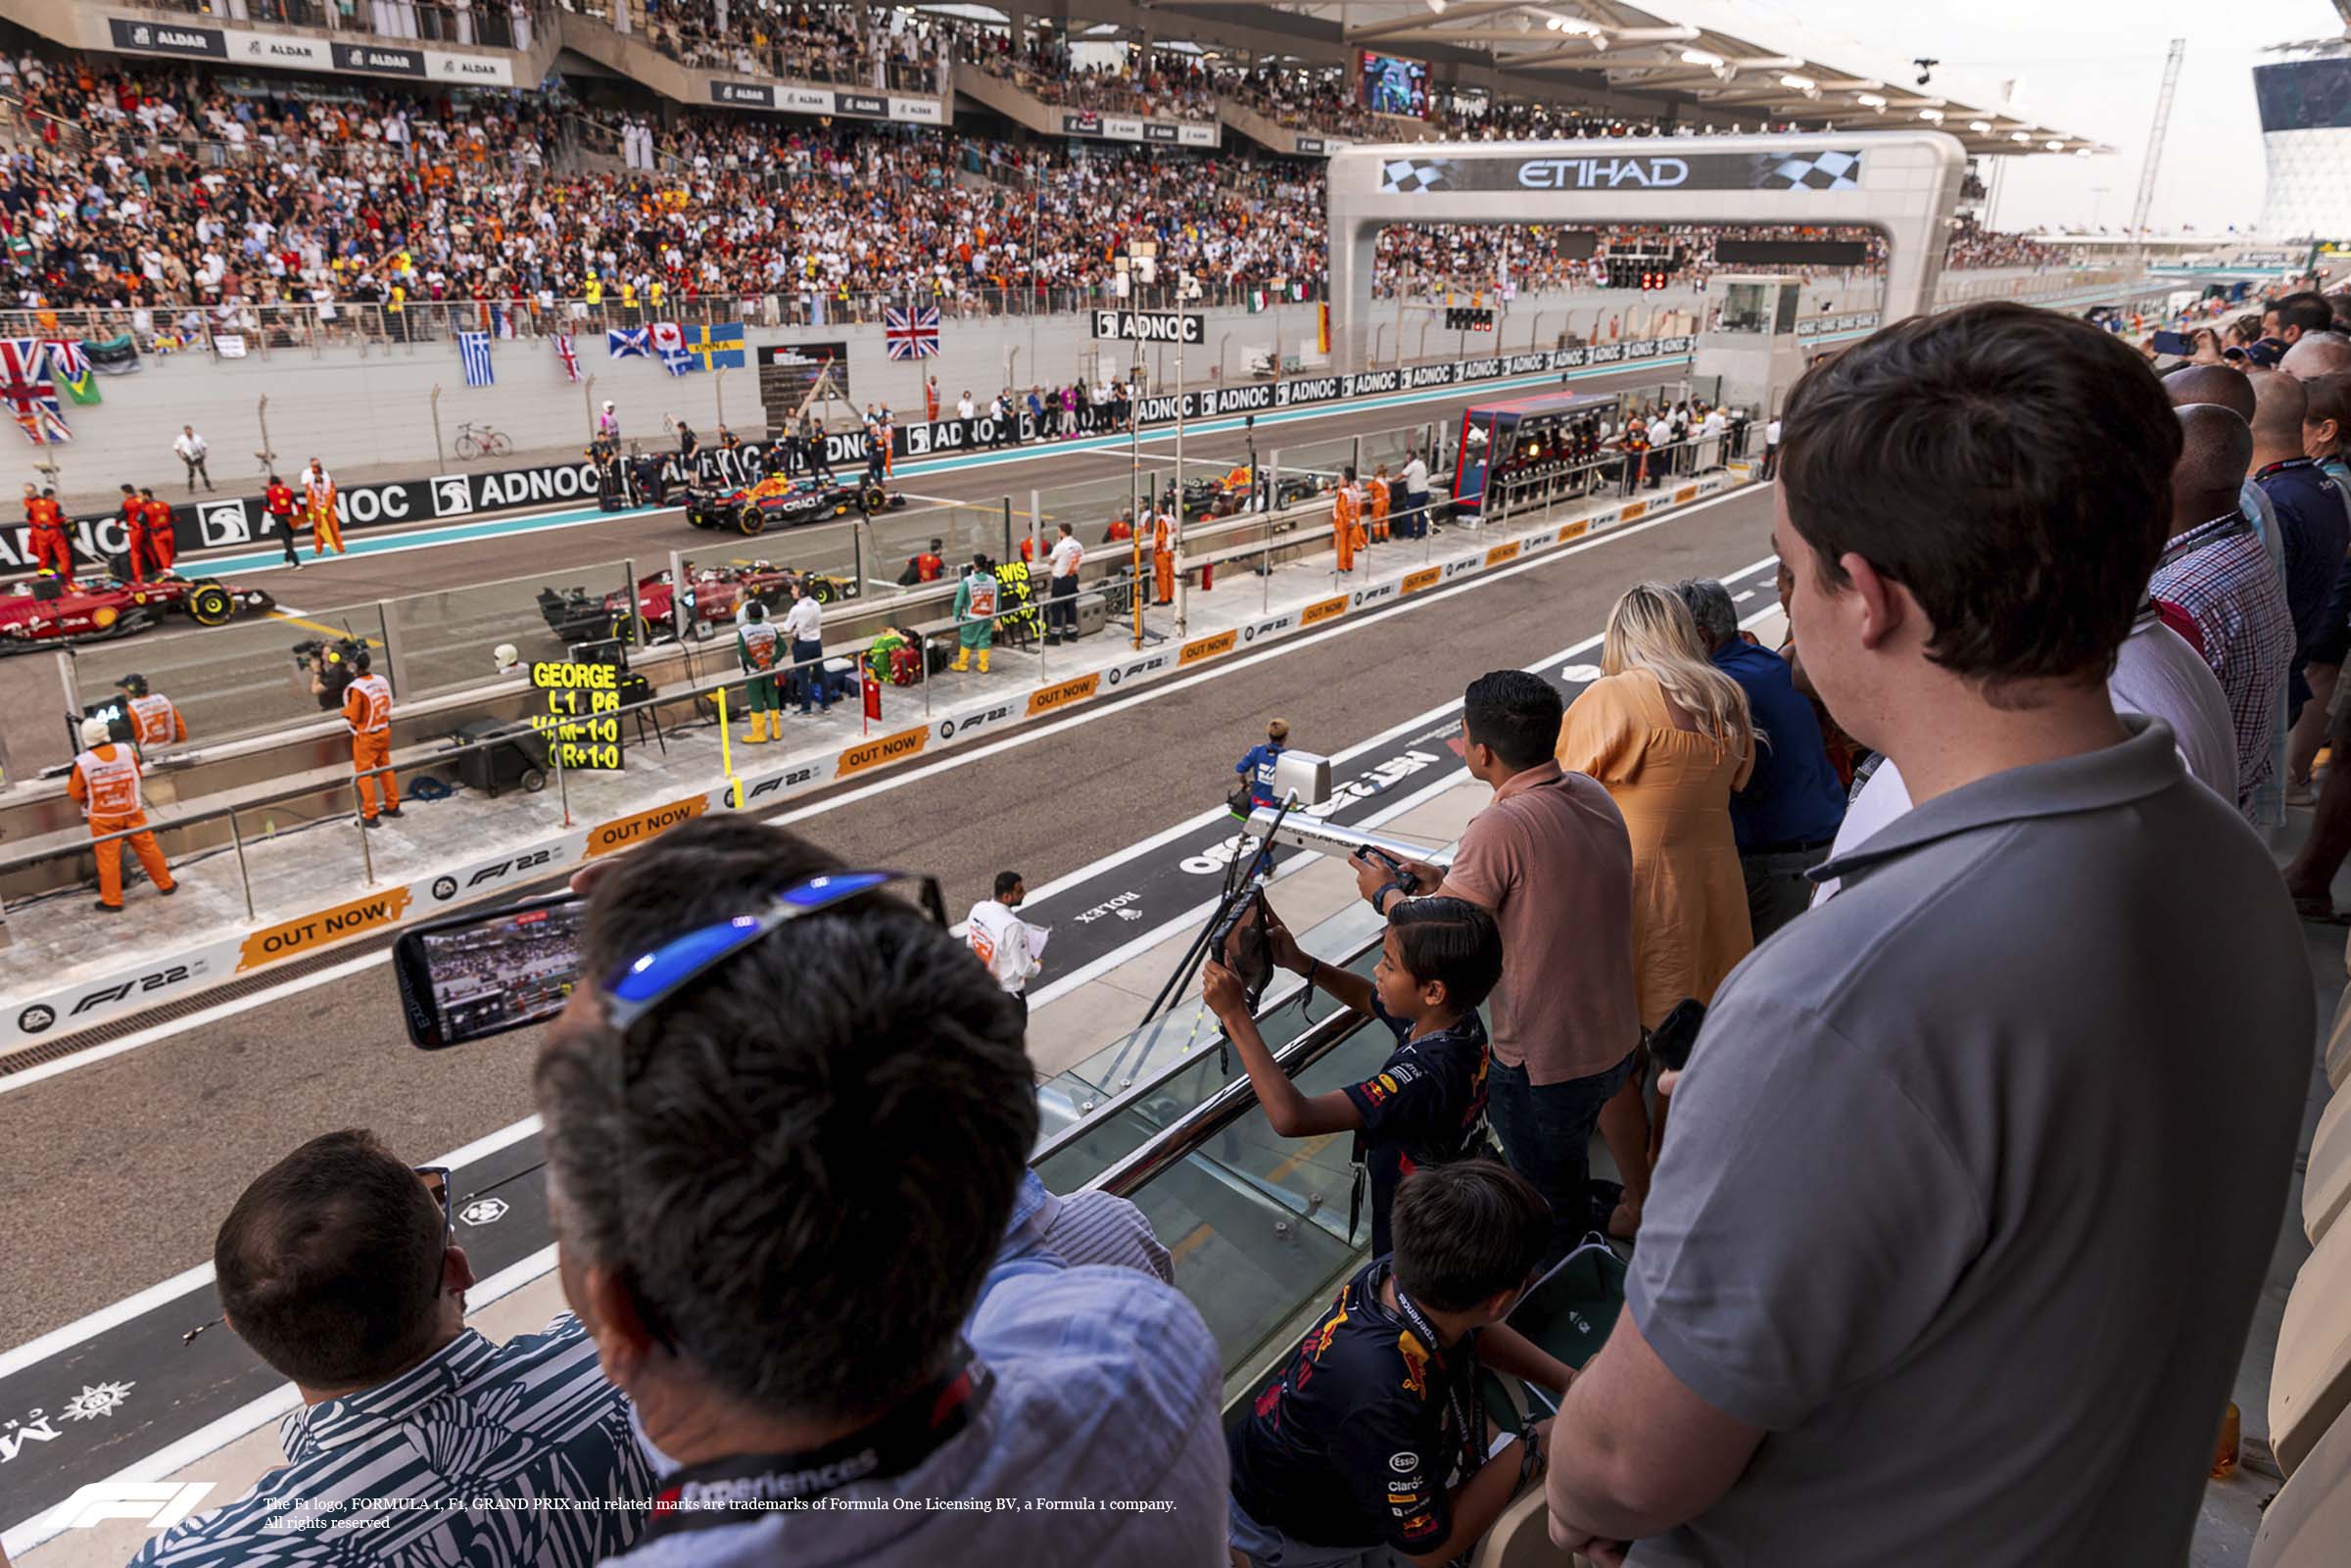 Abu Dhabi Grand Prix packages: A spectator's view at the Yas Marina circuit